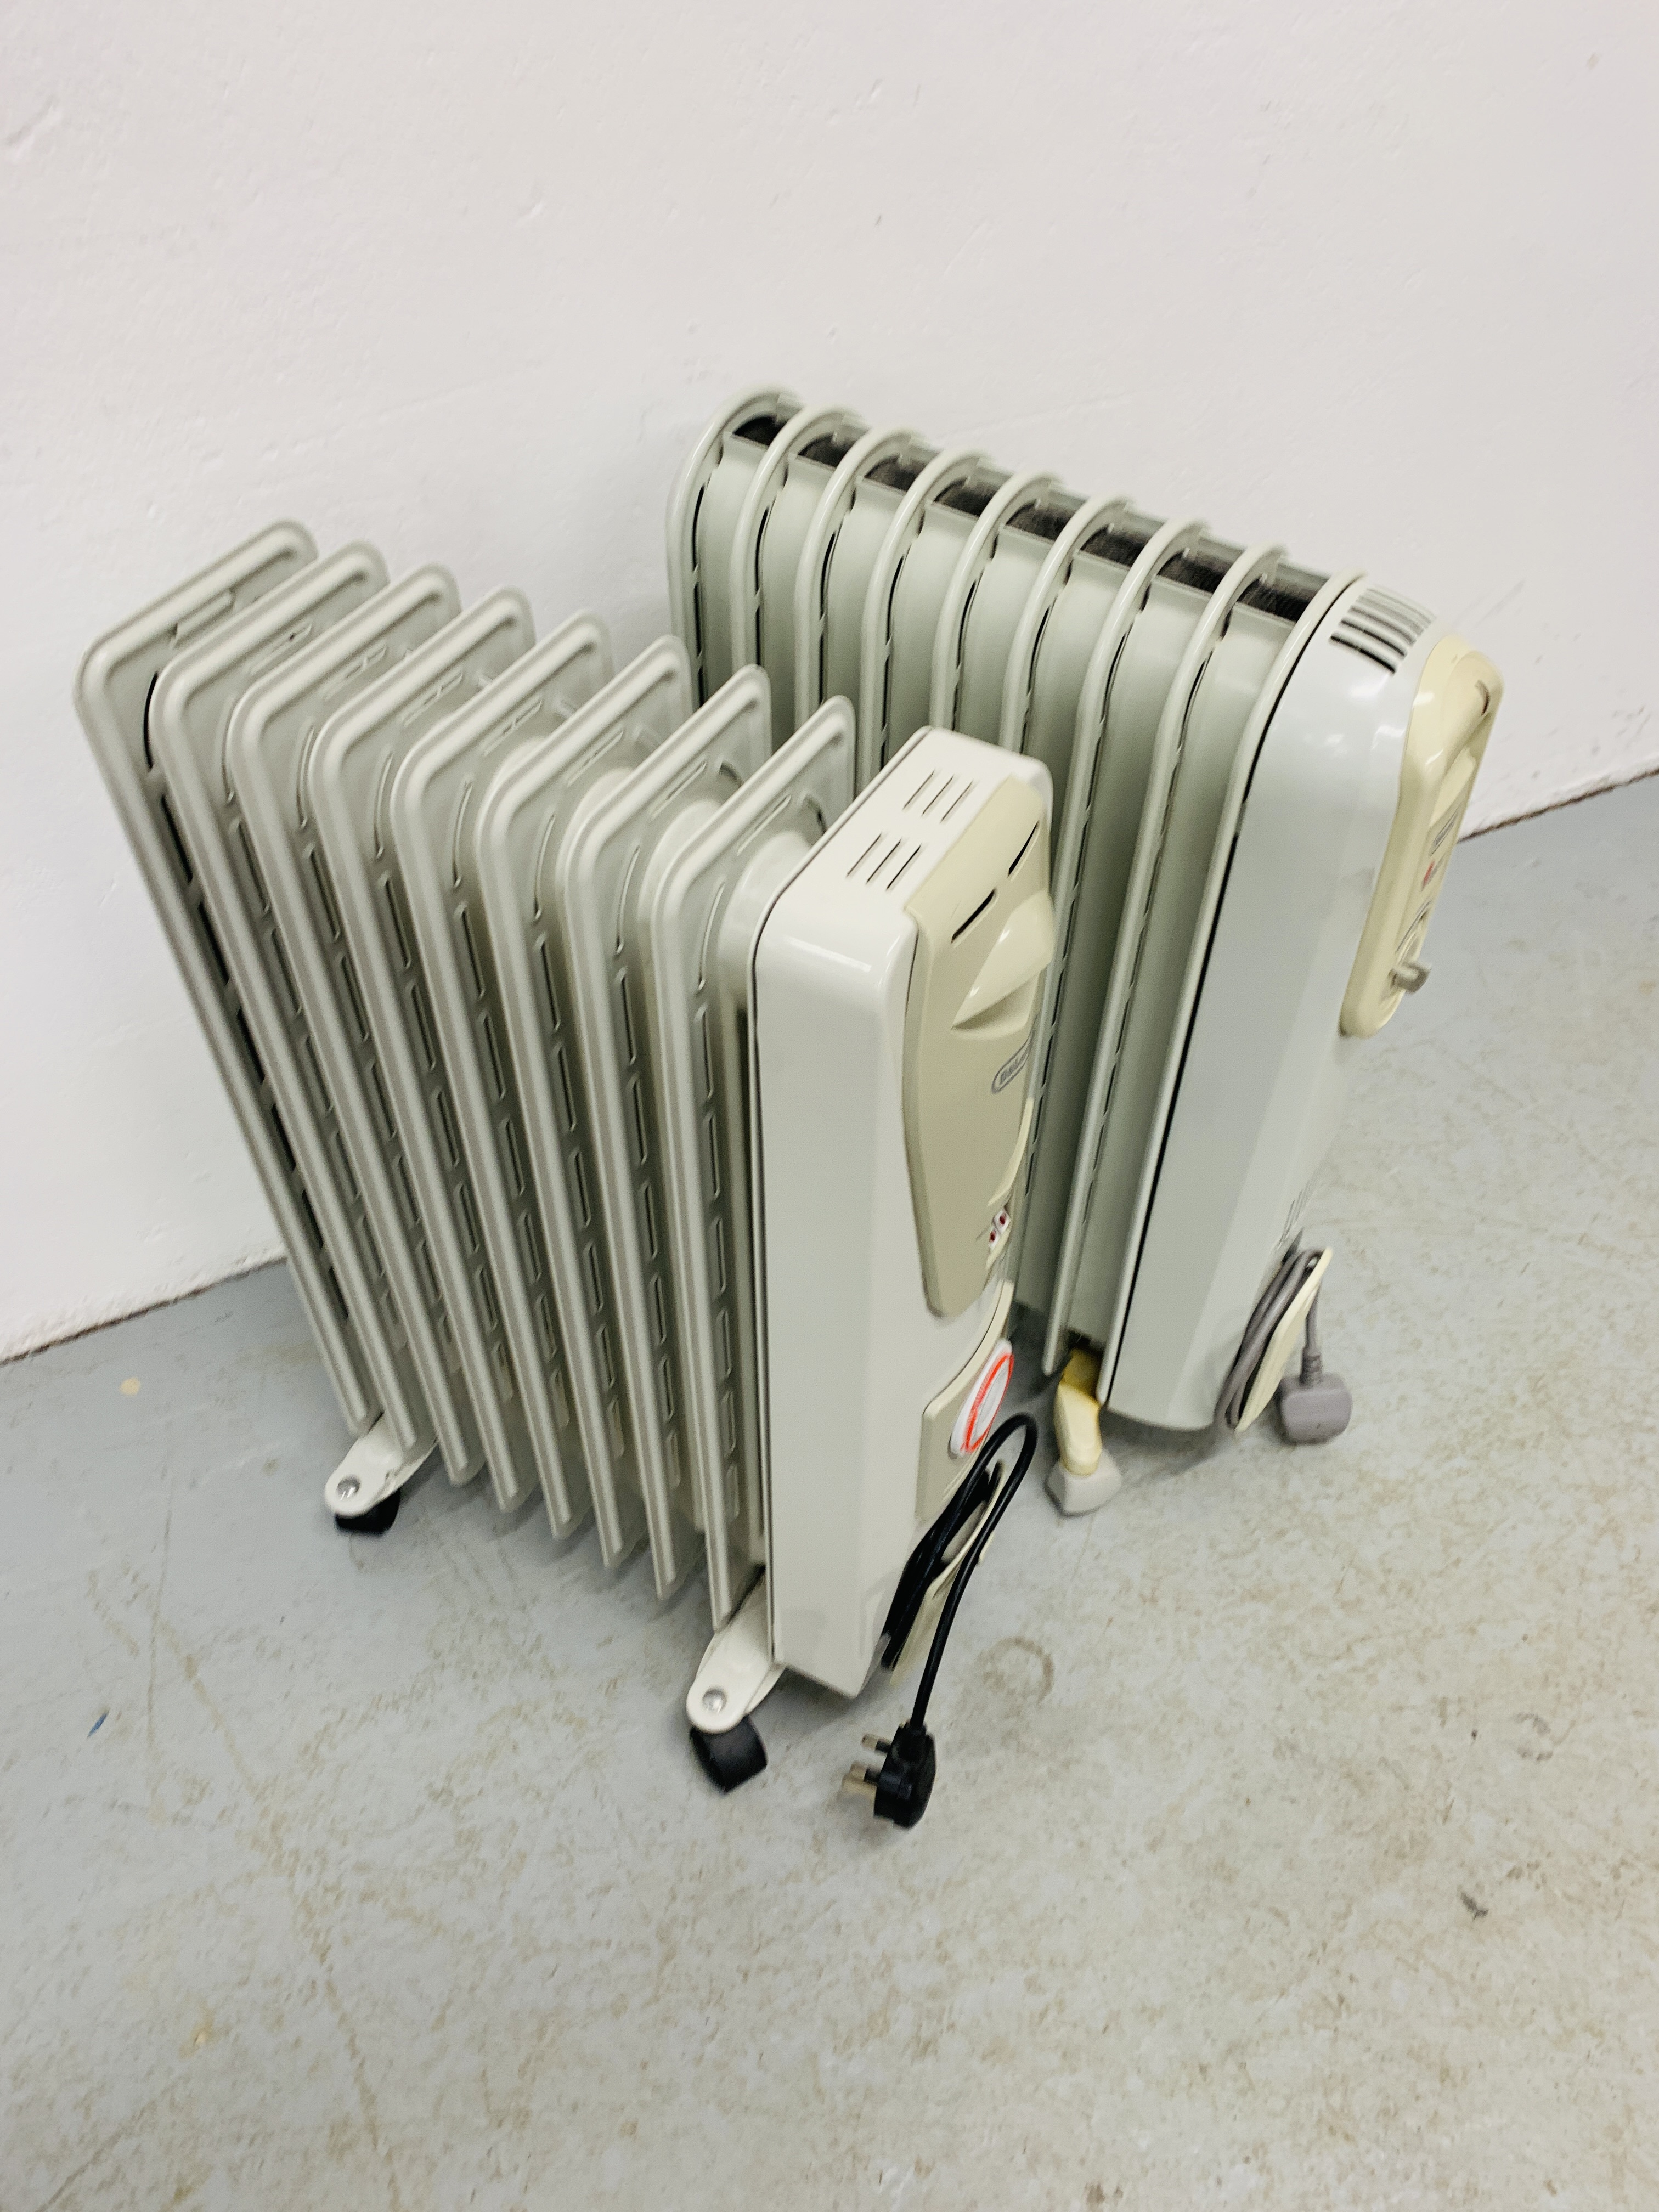 2 X DELONGHI ELECTRIC OIL FILLED RADIATORS (ONE WITH TIMER) - SOLD AS SEEN. - Image 4 of 4